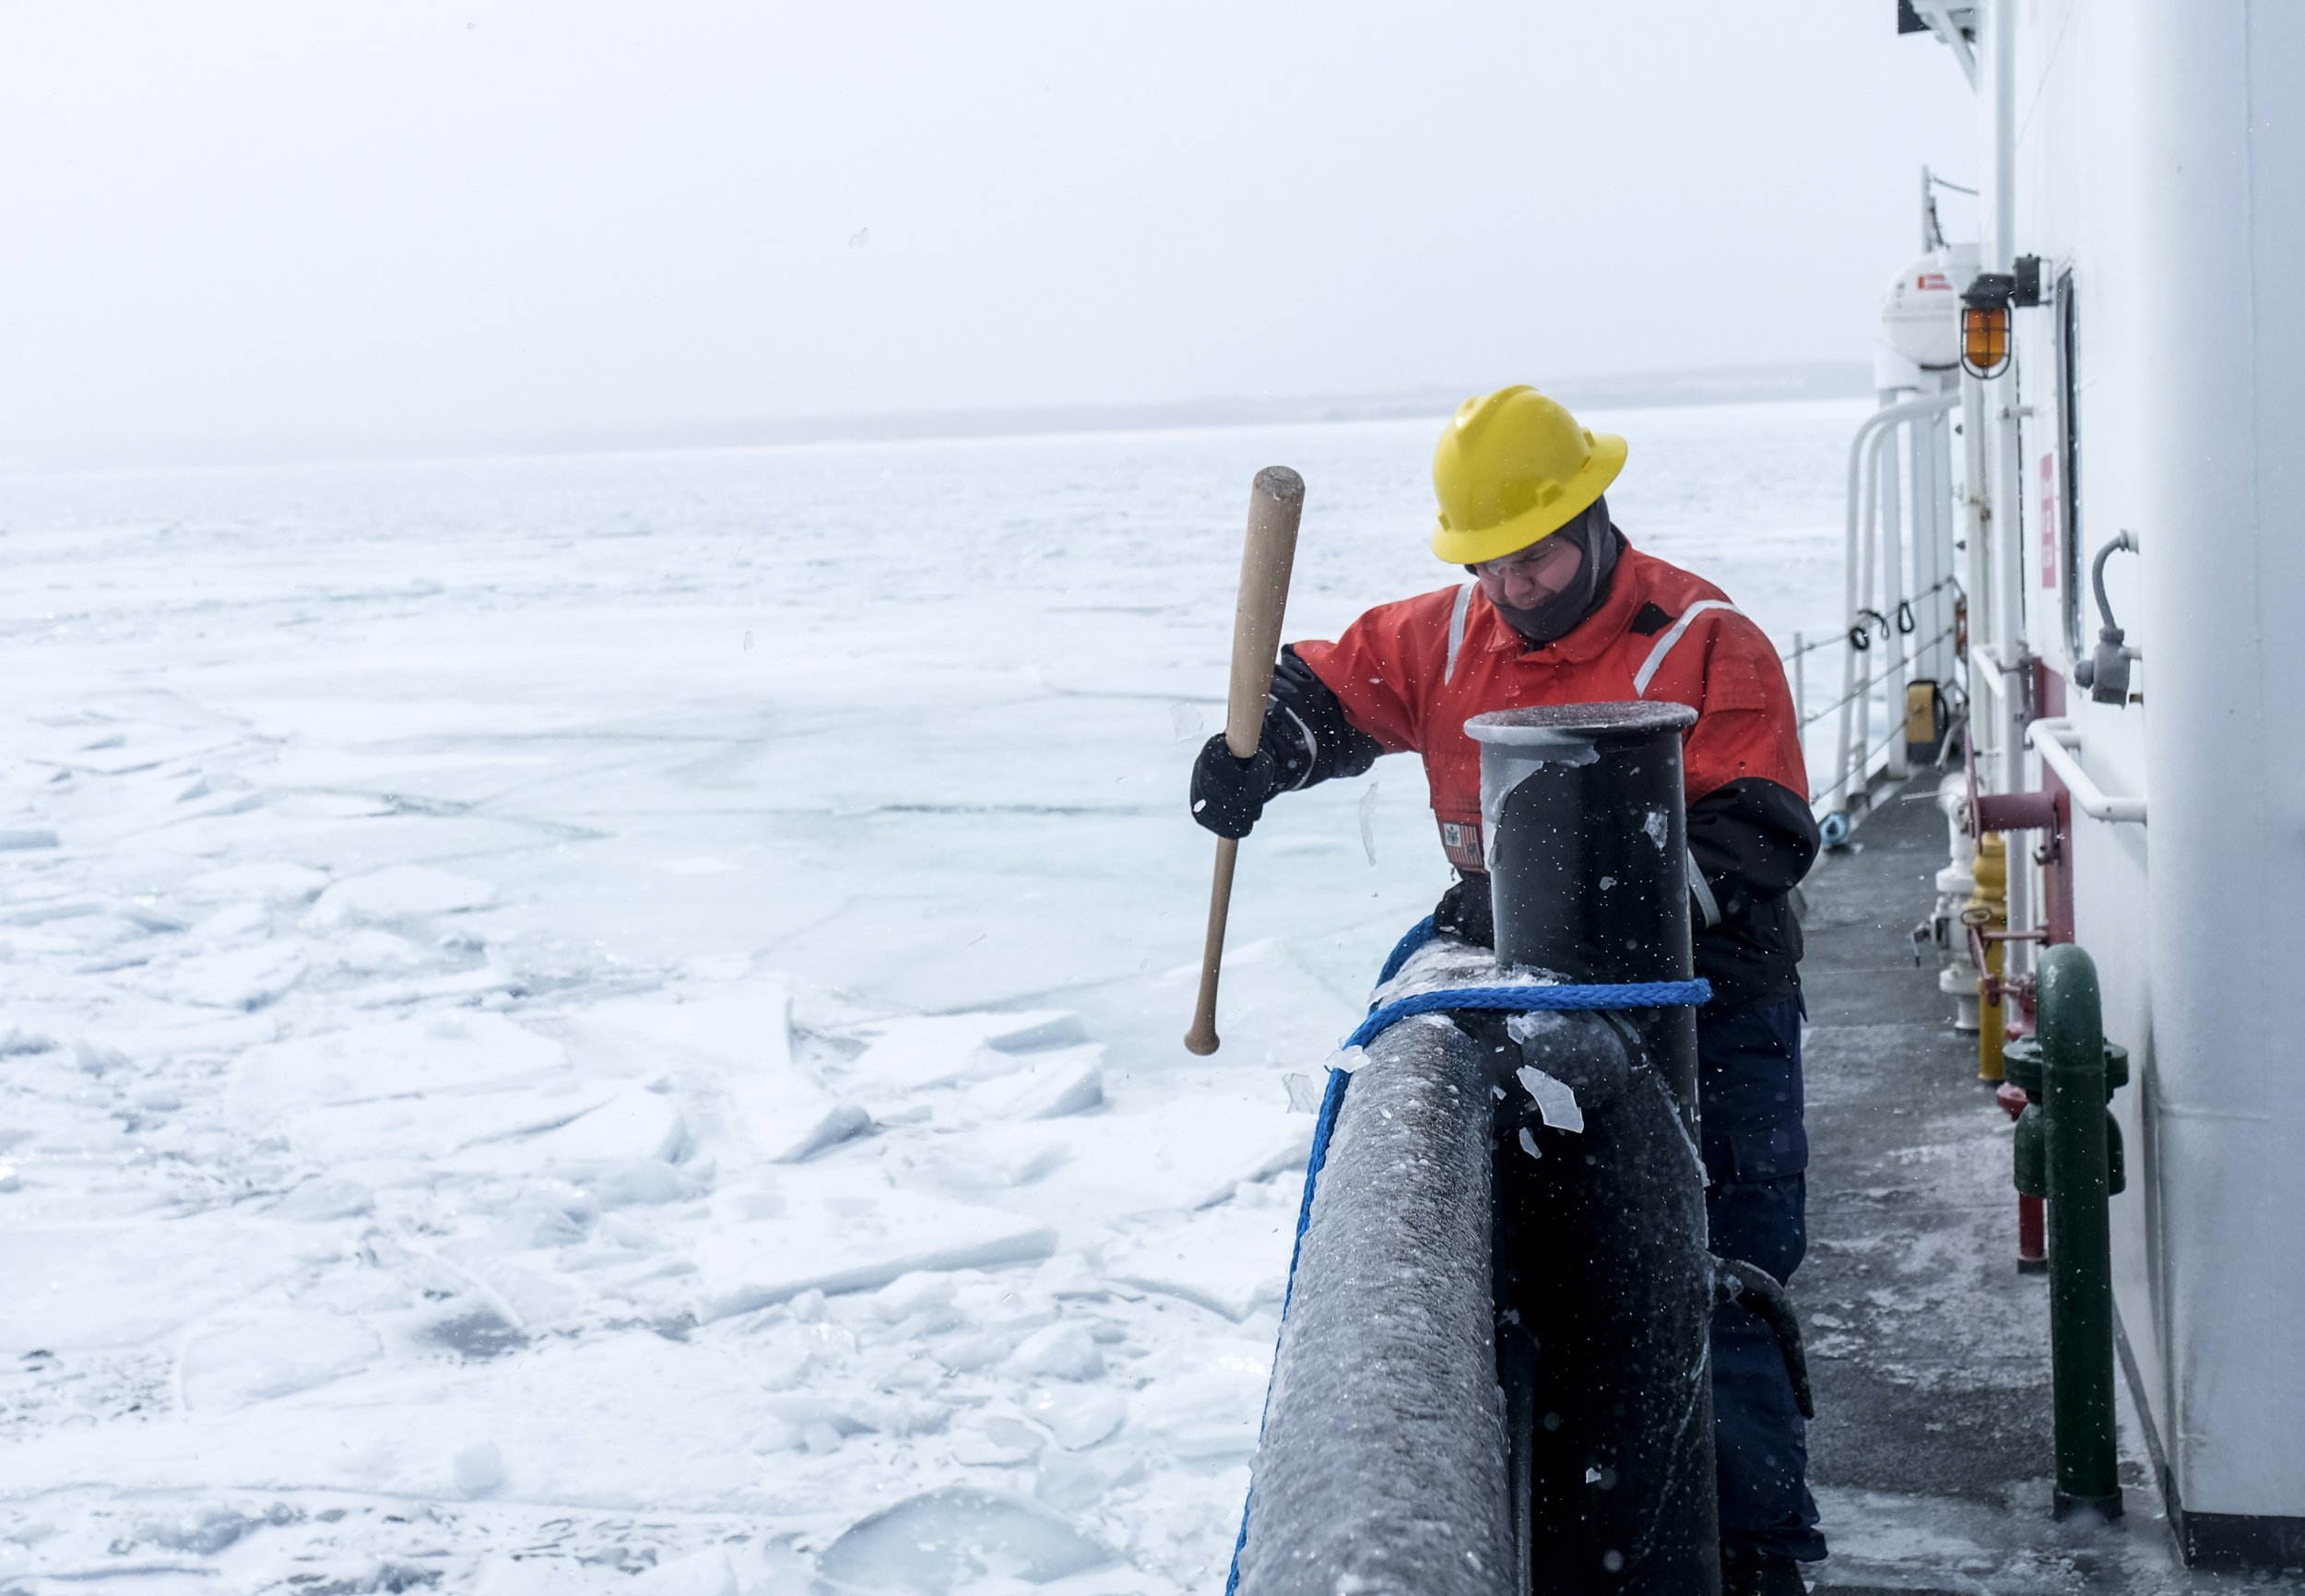  Boatswain's Mate Bruce Carter breaks ice on the forward deck of US Coast Guard Cutter  'Katmai Bay' during an operation to clear a Frozen section of the St. Mary's river on Tuesday, March 14, 2023 near Lake Huron. 